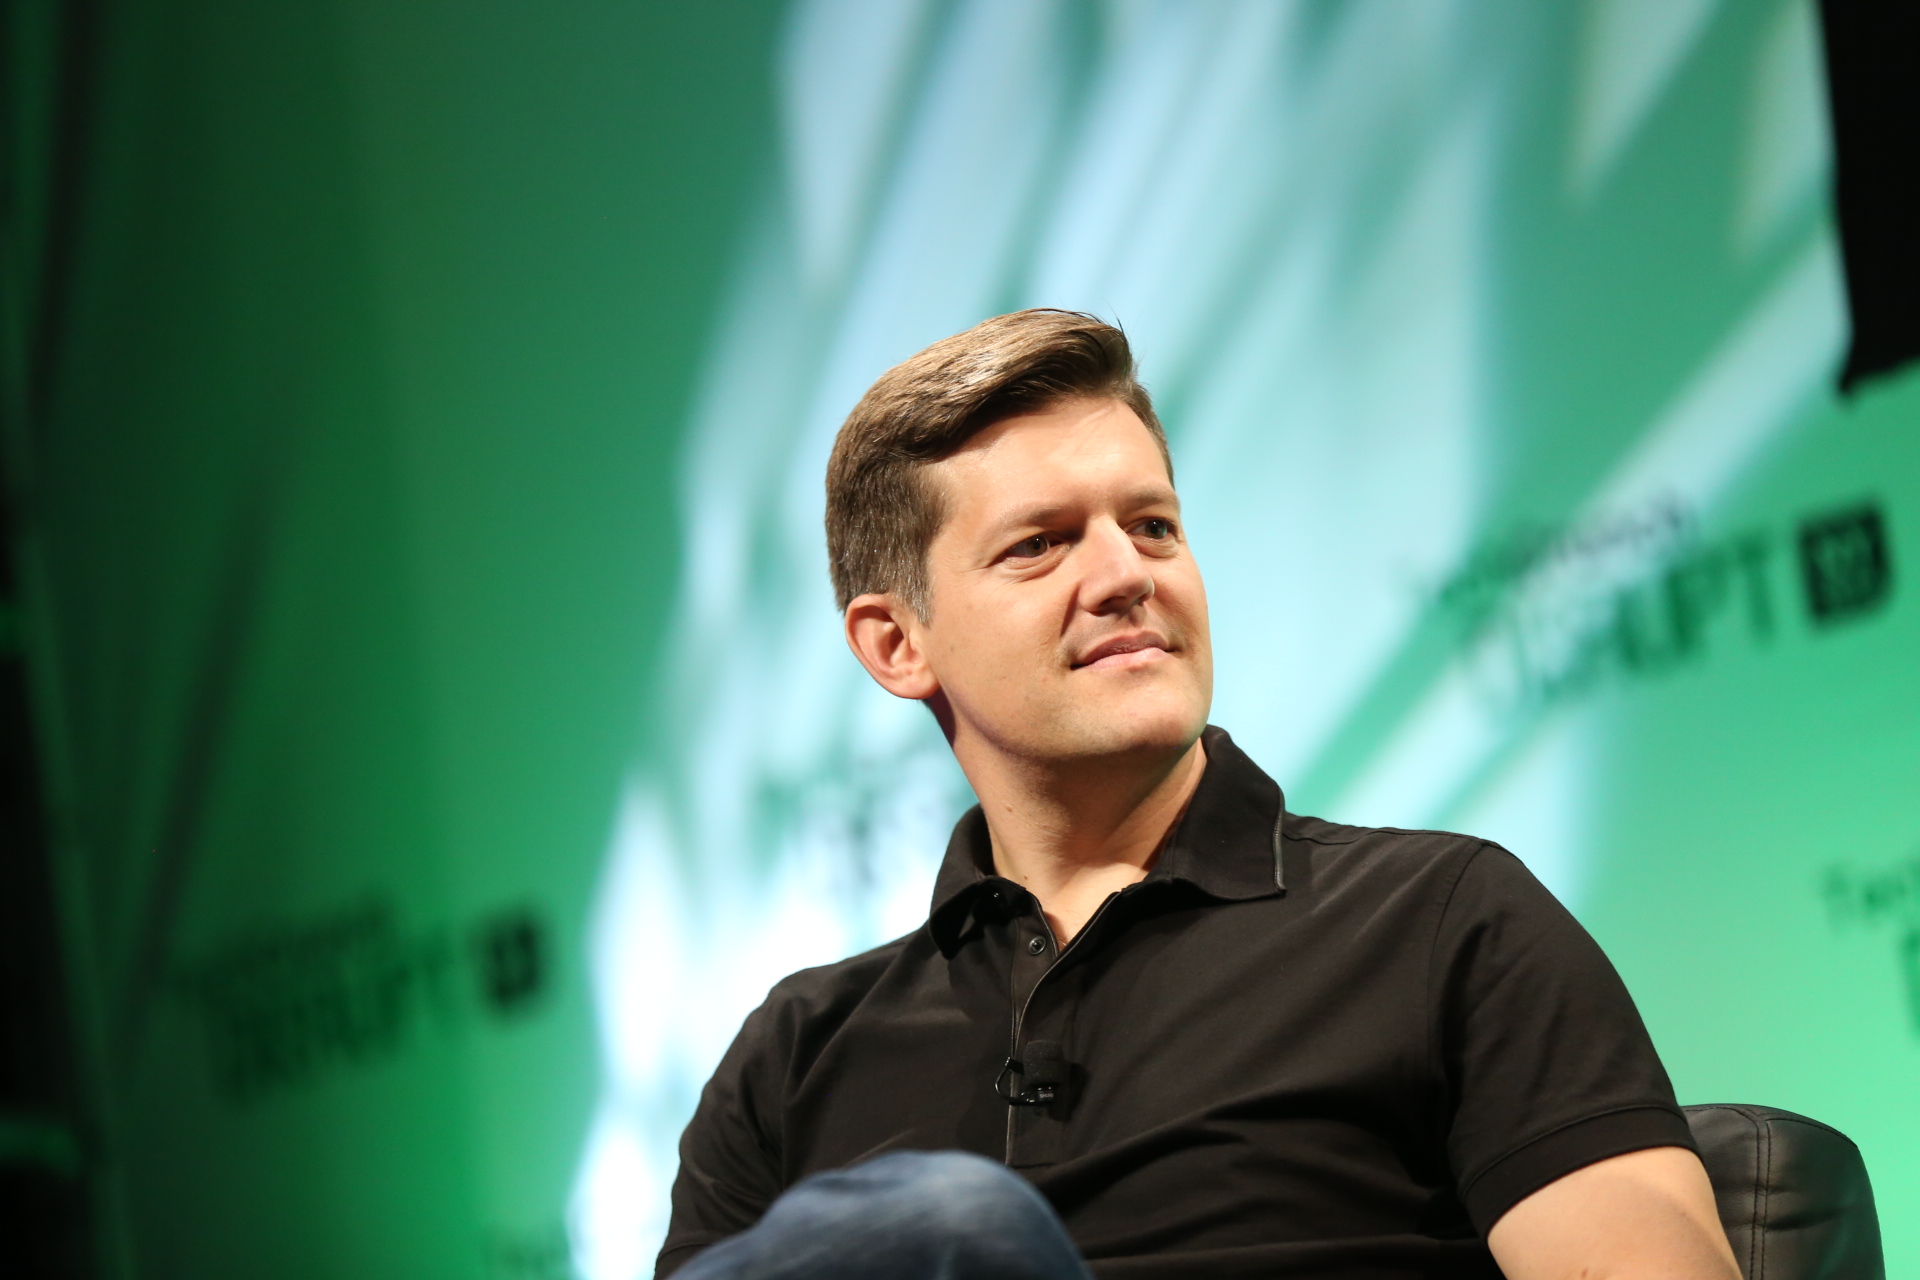 Sequoia Capital has quietly announced a leadership change-up, with partner Jim Goetz taking a step back | TechCrunch